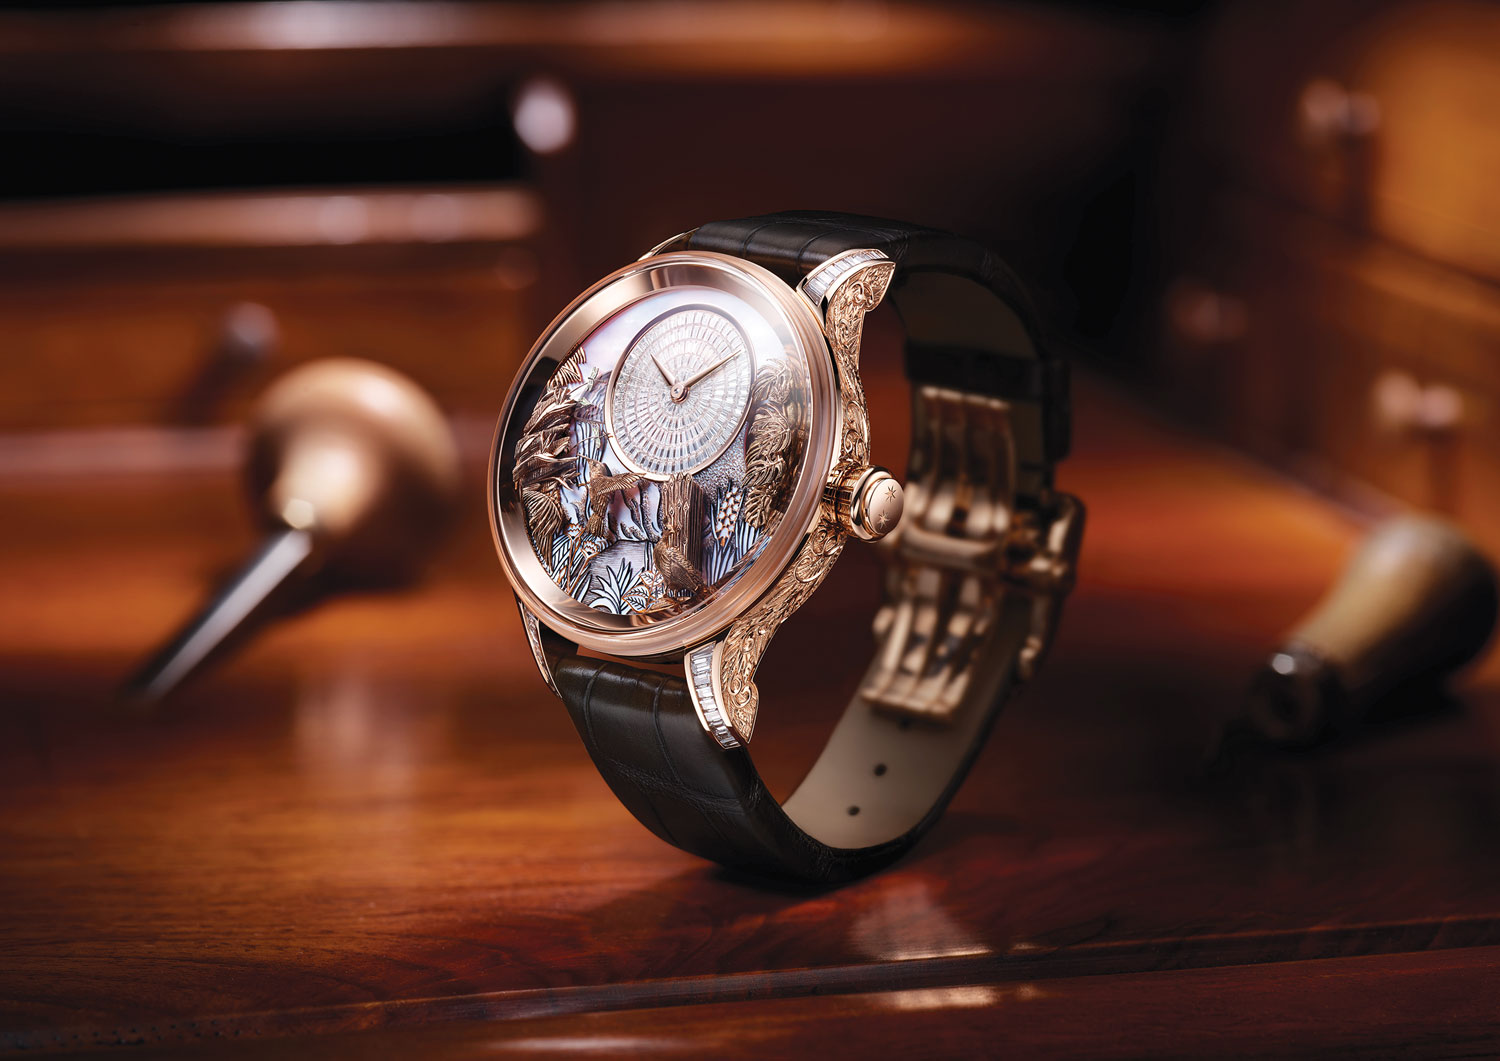 Jaquet Droz: One-Of-A-Kind